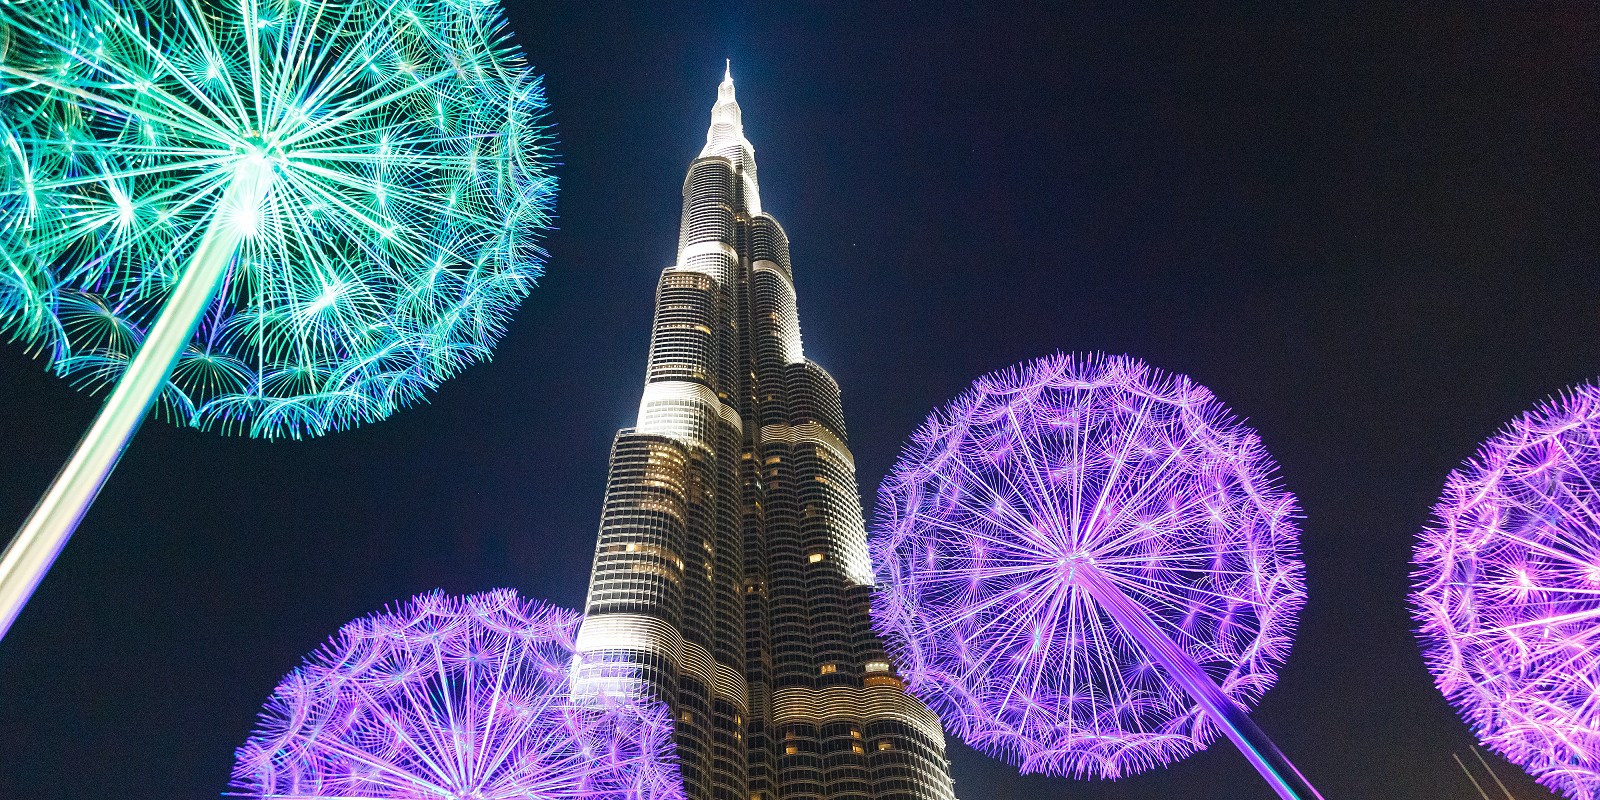 Travel blog: 15 Pictures of Dubai Demonstrating Why It Needs to Be On Your Travel Bucket List